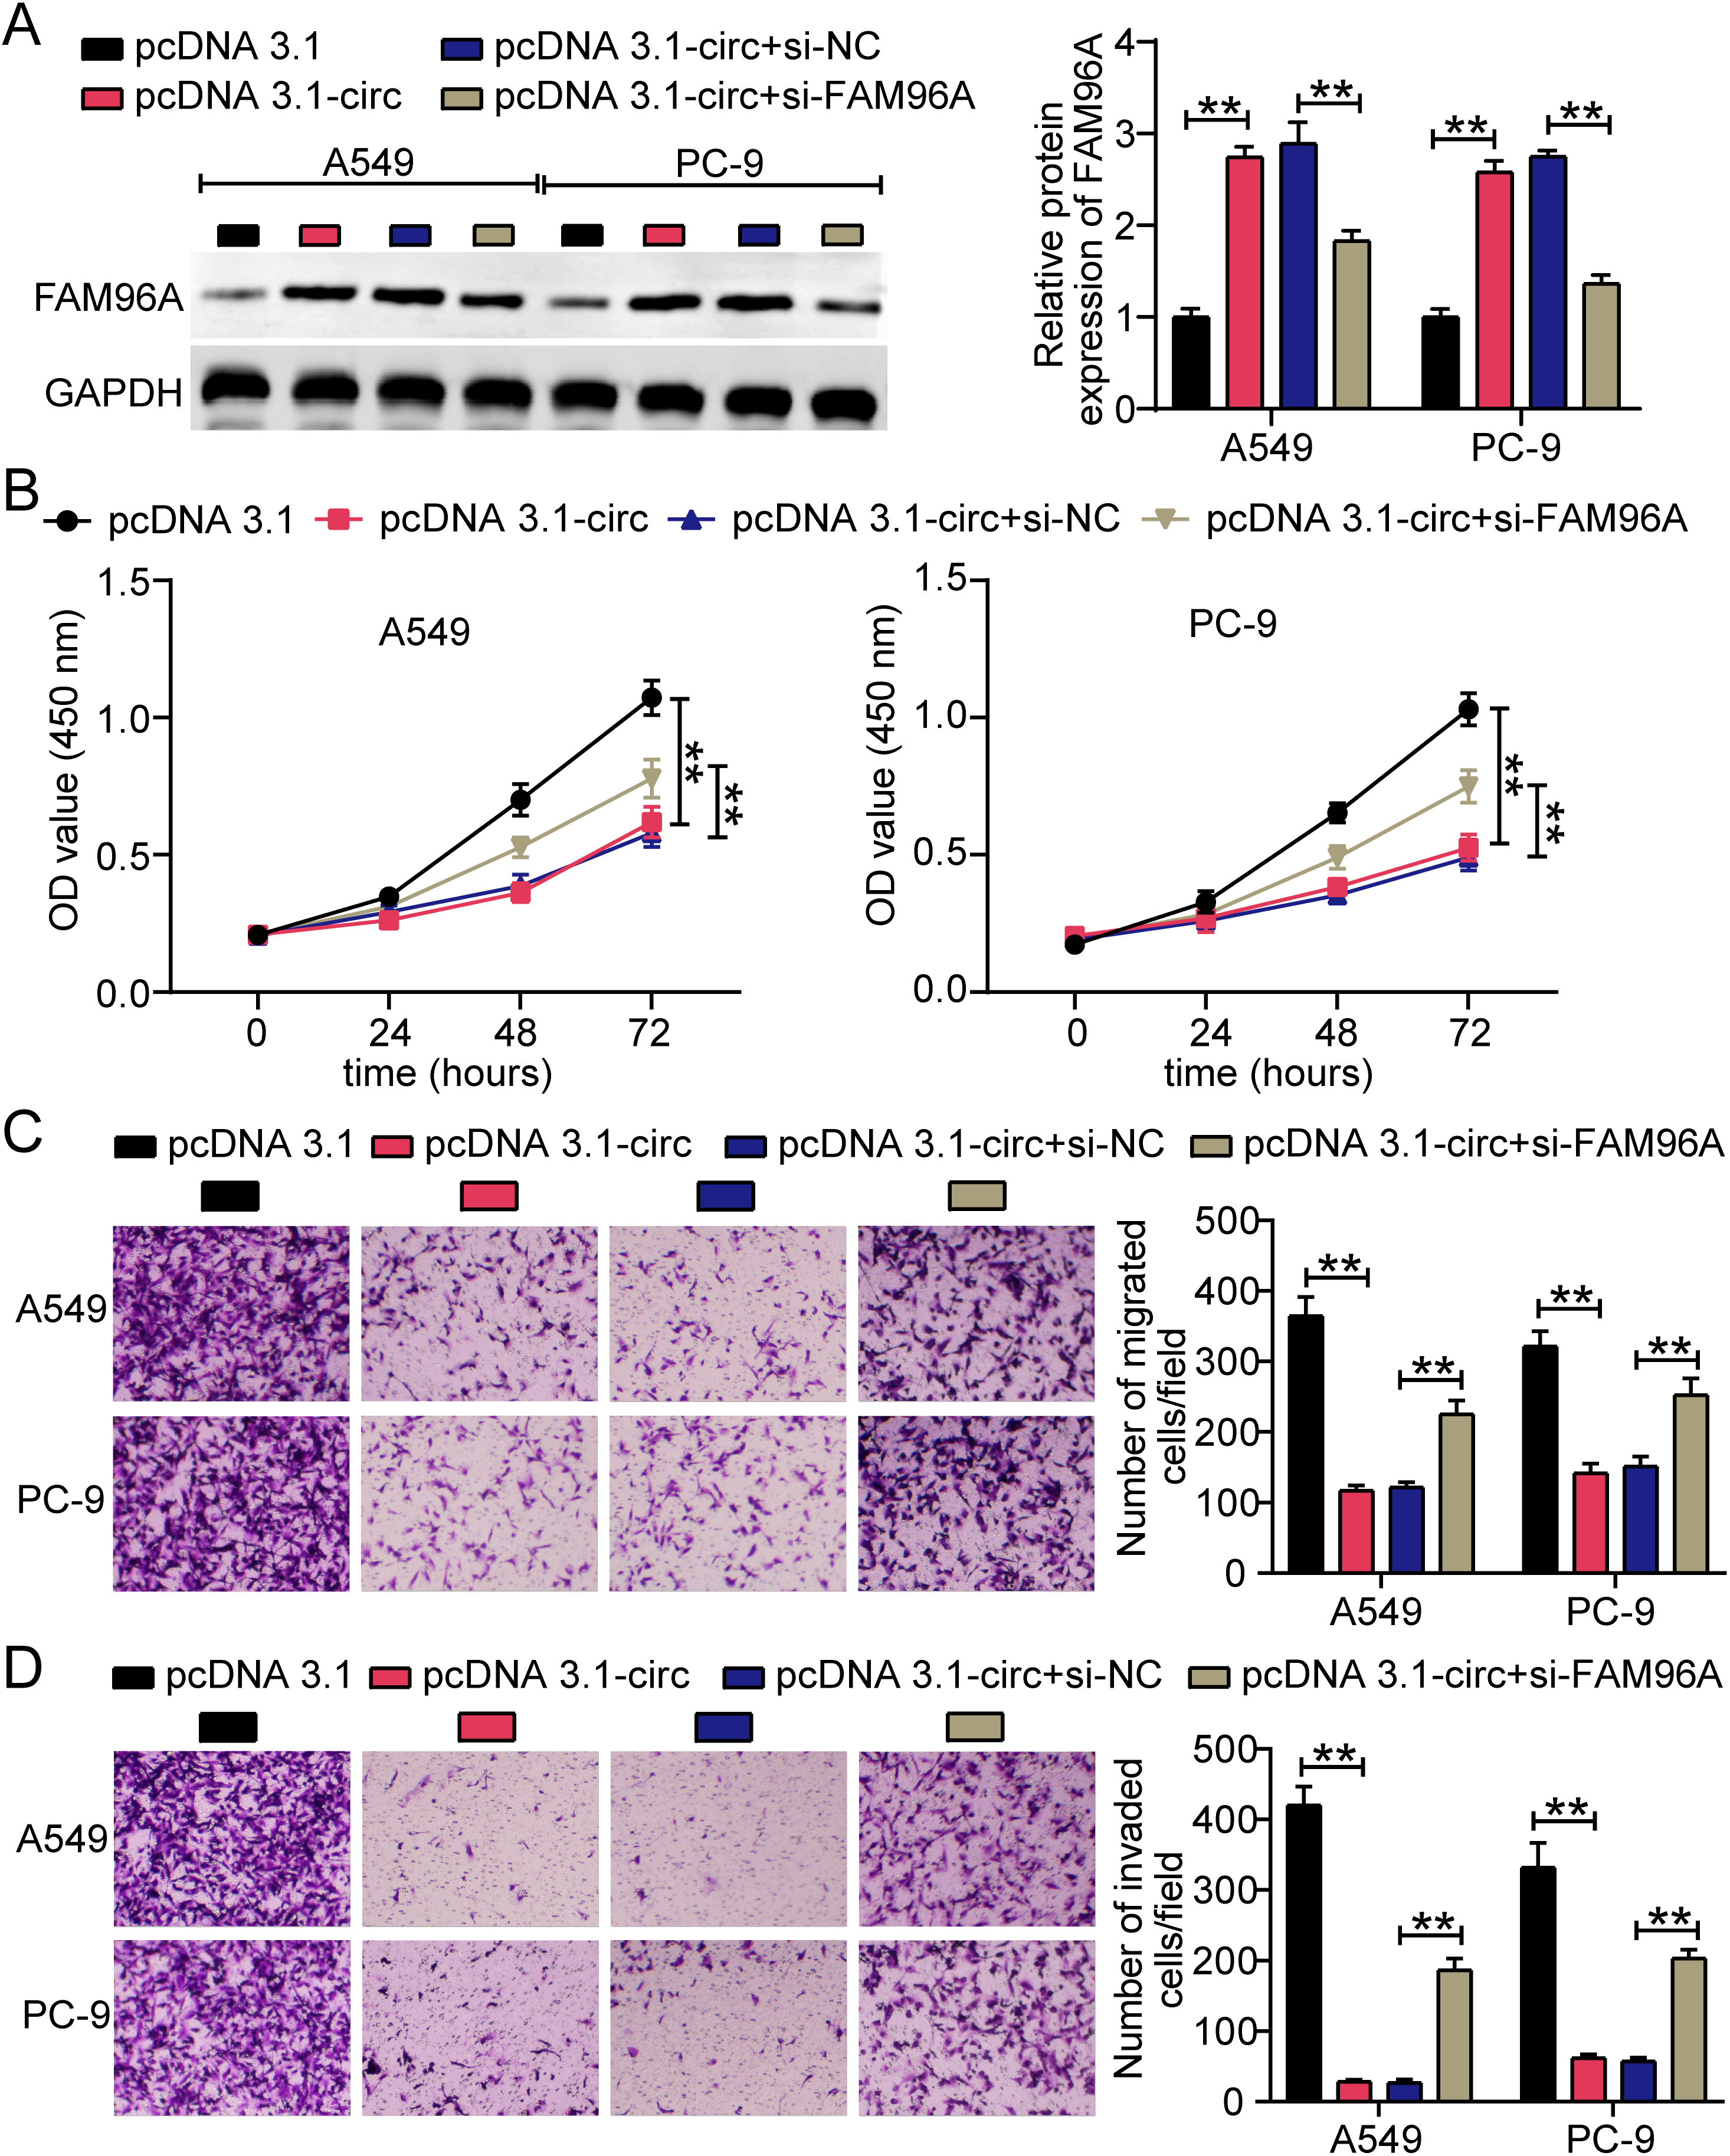 FAM96A knockdown rescued the inhibitory effect of hsa_circ_0000018 overexpression on LA cells. (A) Western blotting was conducted to verify the expression of FAM96A protein in transfected A549 and PC-9 cells. (B) The cell proliferation ability of transfected A549 and PC-9 cells was evaluated using CCK8 assay. (C-D) The cell migration (C) and invasion (D) abilities of transfected A549 and PC-9 cells were identified using transwell assays. pcDNA 3.1-circ, hsa_circ_0000018 overexpression vector. si-NC, negative control siRNA. si-FAM96A, siRNA targeting FAM96A. **P < 0.01.